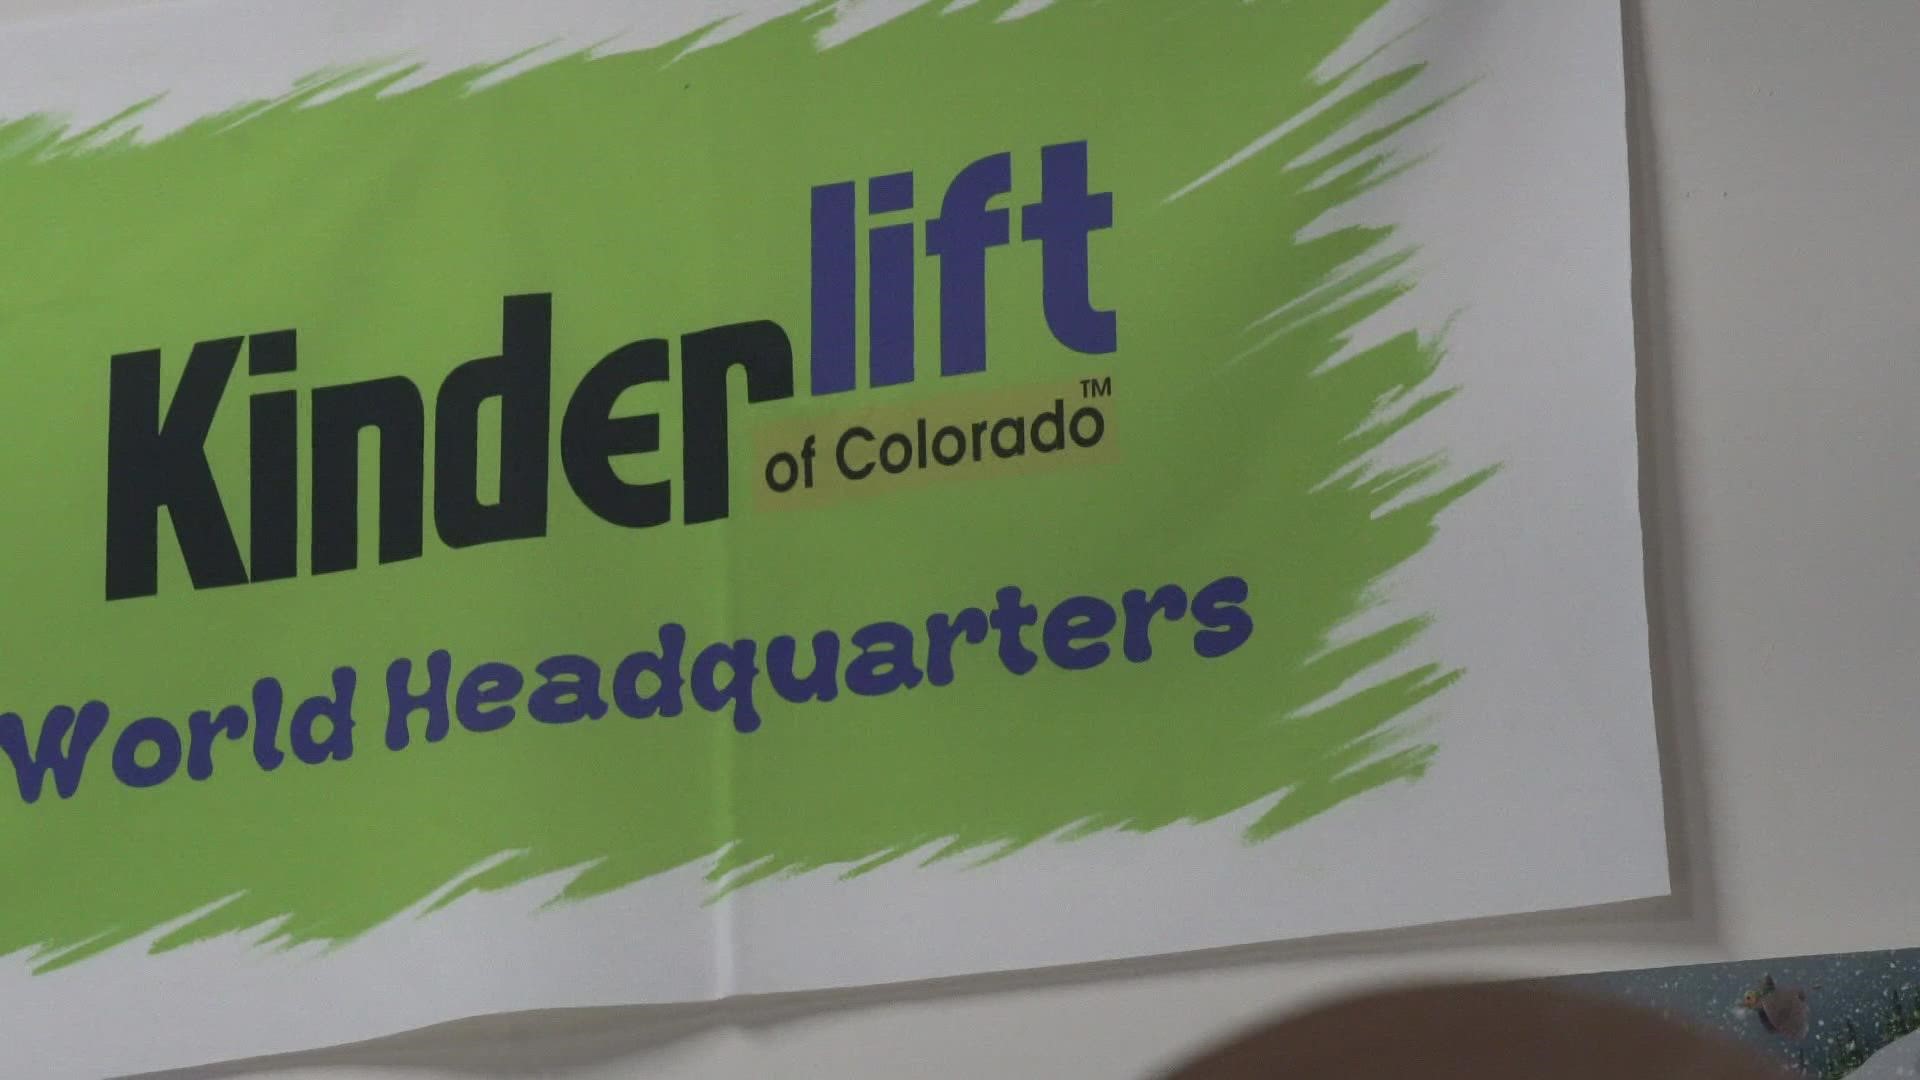 Colorado's Kinder Lift normally makes ski vests for children learning to ski, now they are also making shirts to raise money for the Red Cross in Ukraine.